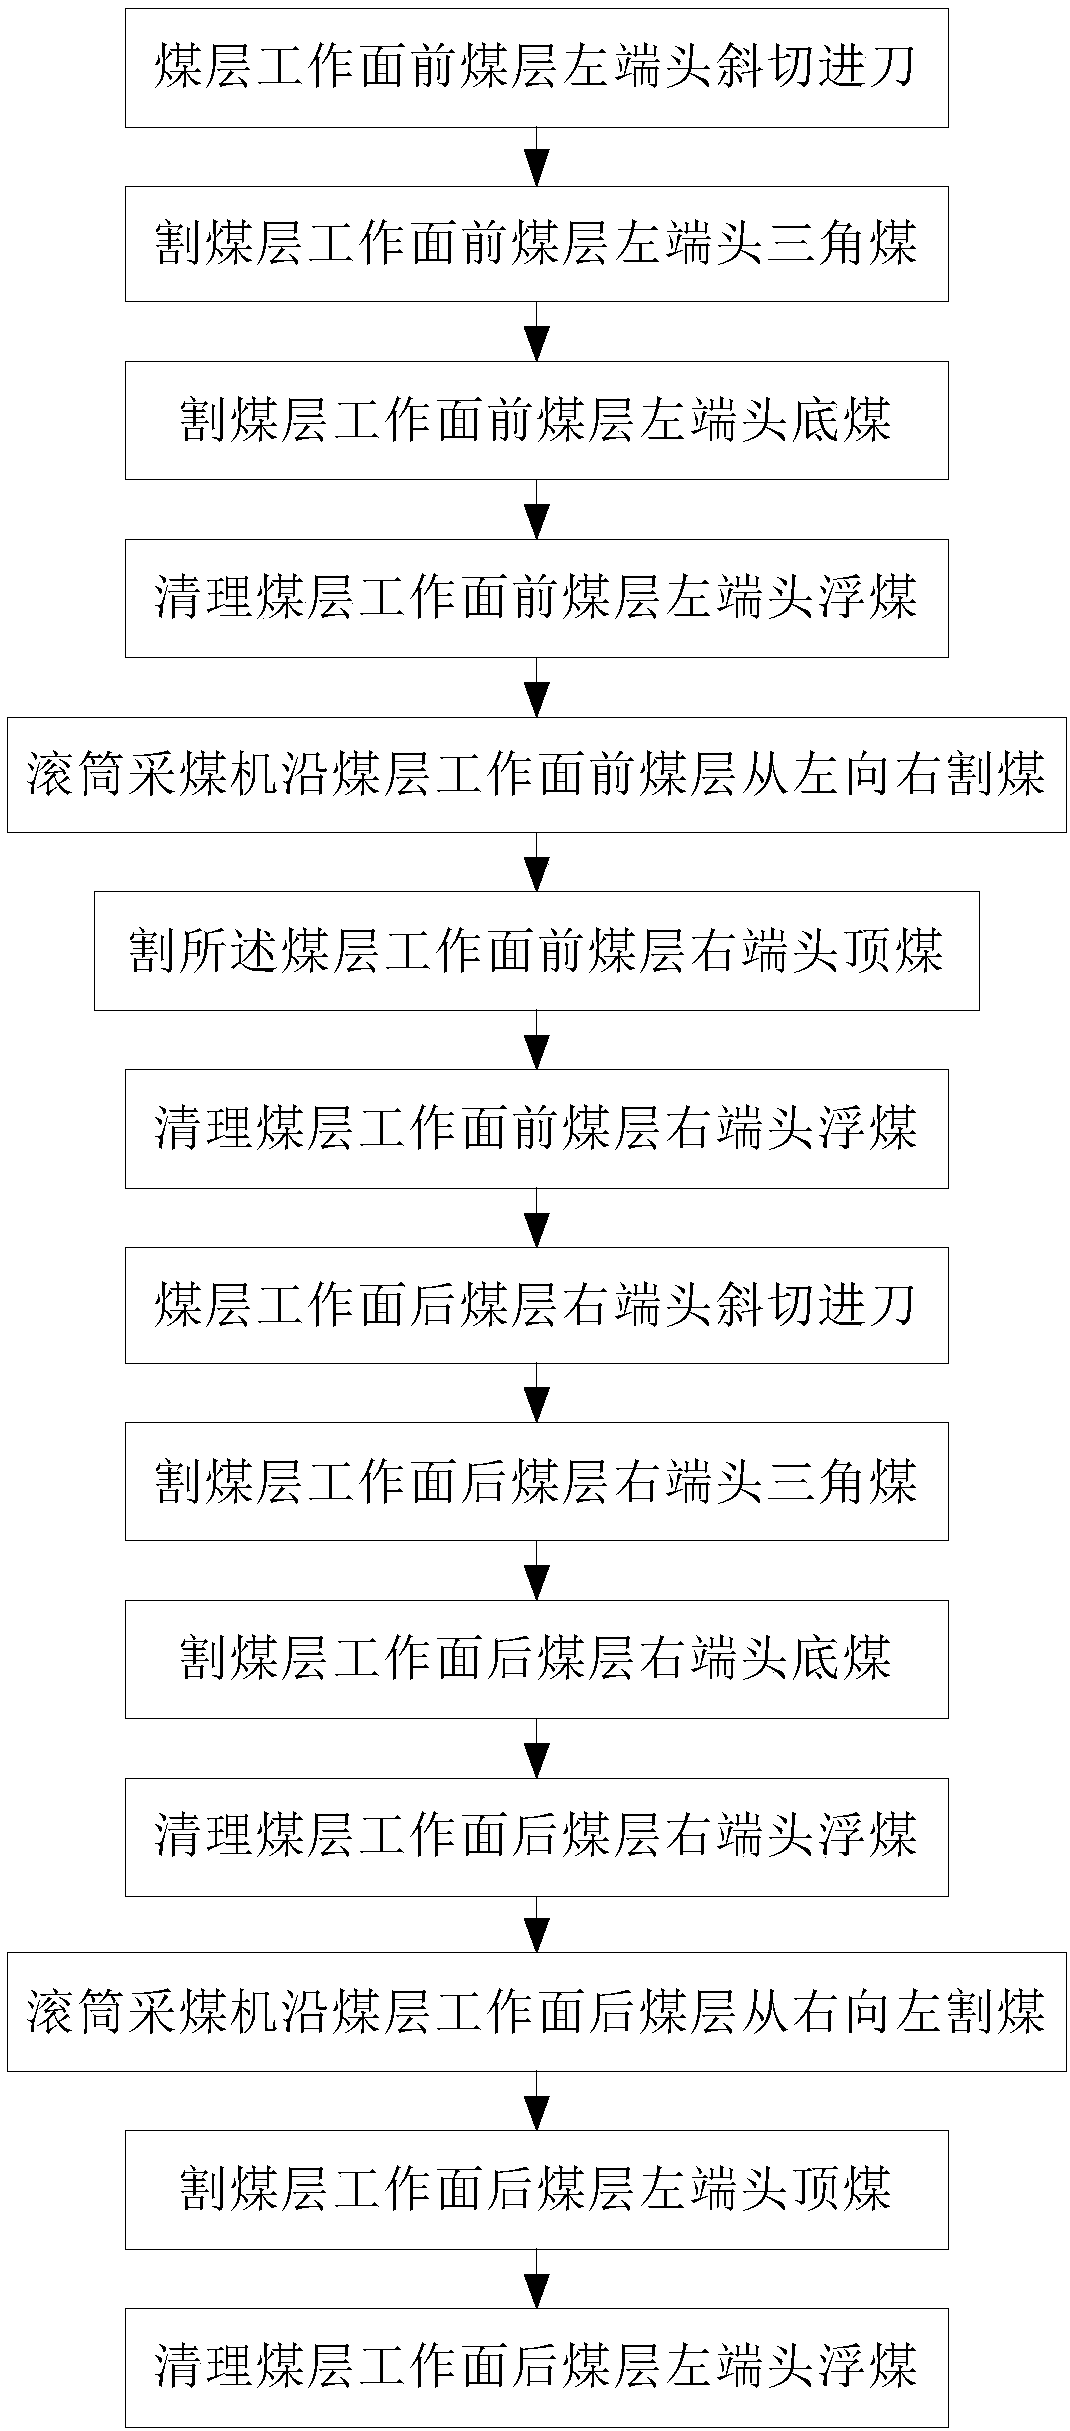 Automatic cutting control method for demonstration and reproduction of underground thin coal seam shearer with wind direction